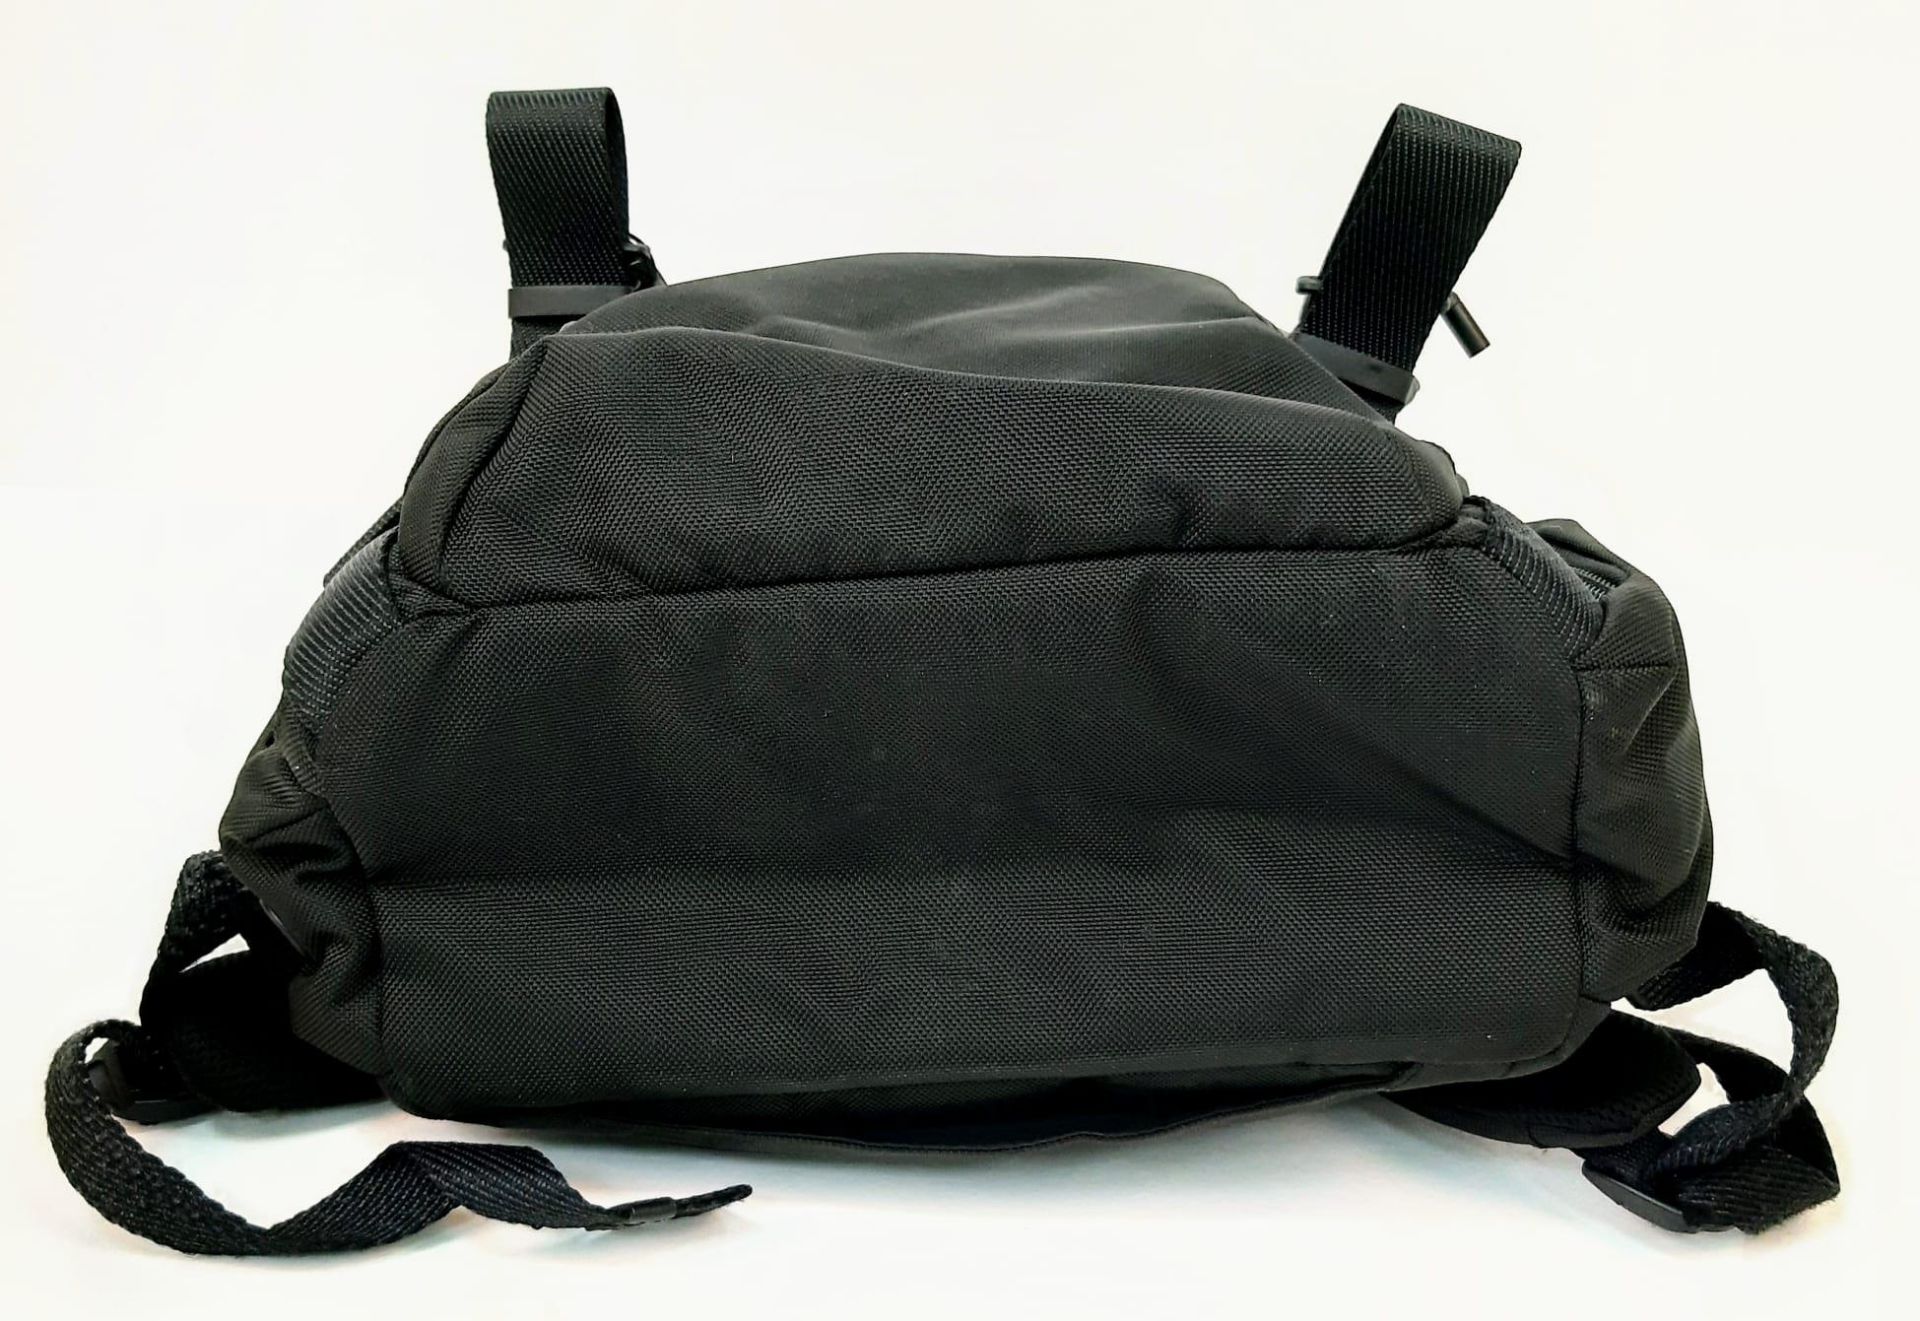 A TUMI Lark Black Backpack, 23L Capacity, Pockets for 16" Laptop, Tablet, Phone and Water Bottle. - Bild 5 aus 6